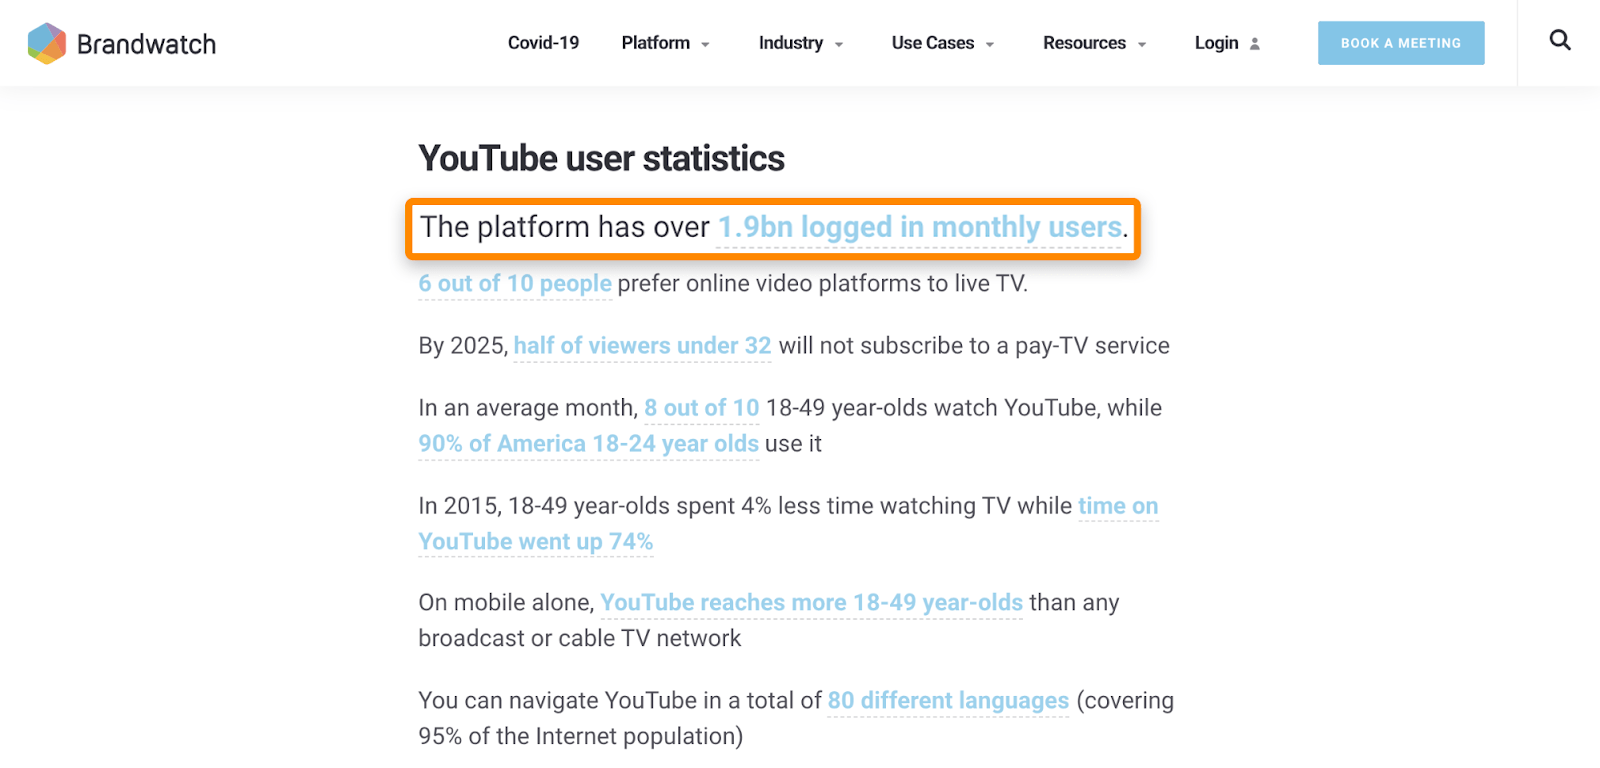 4 outdated statistic